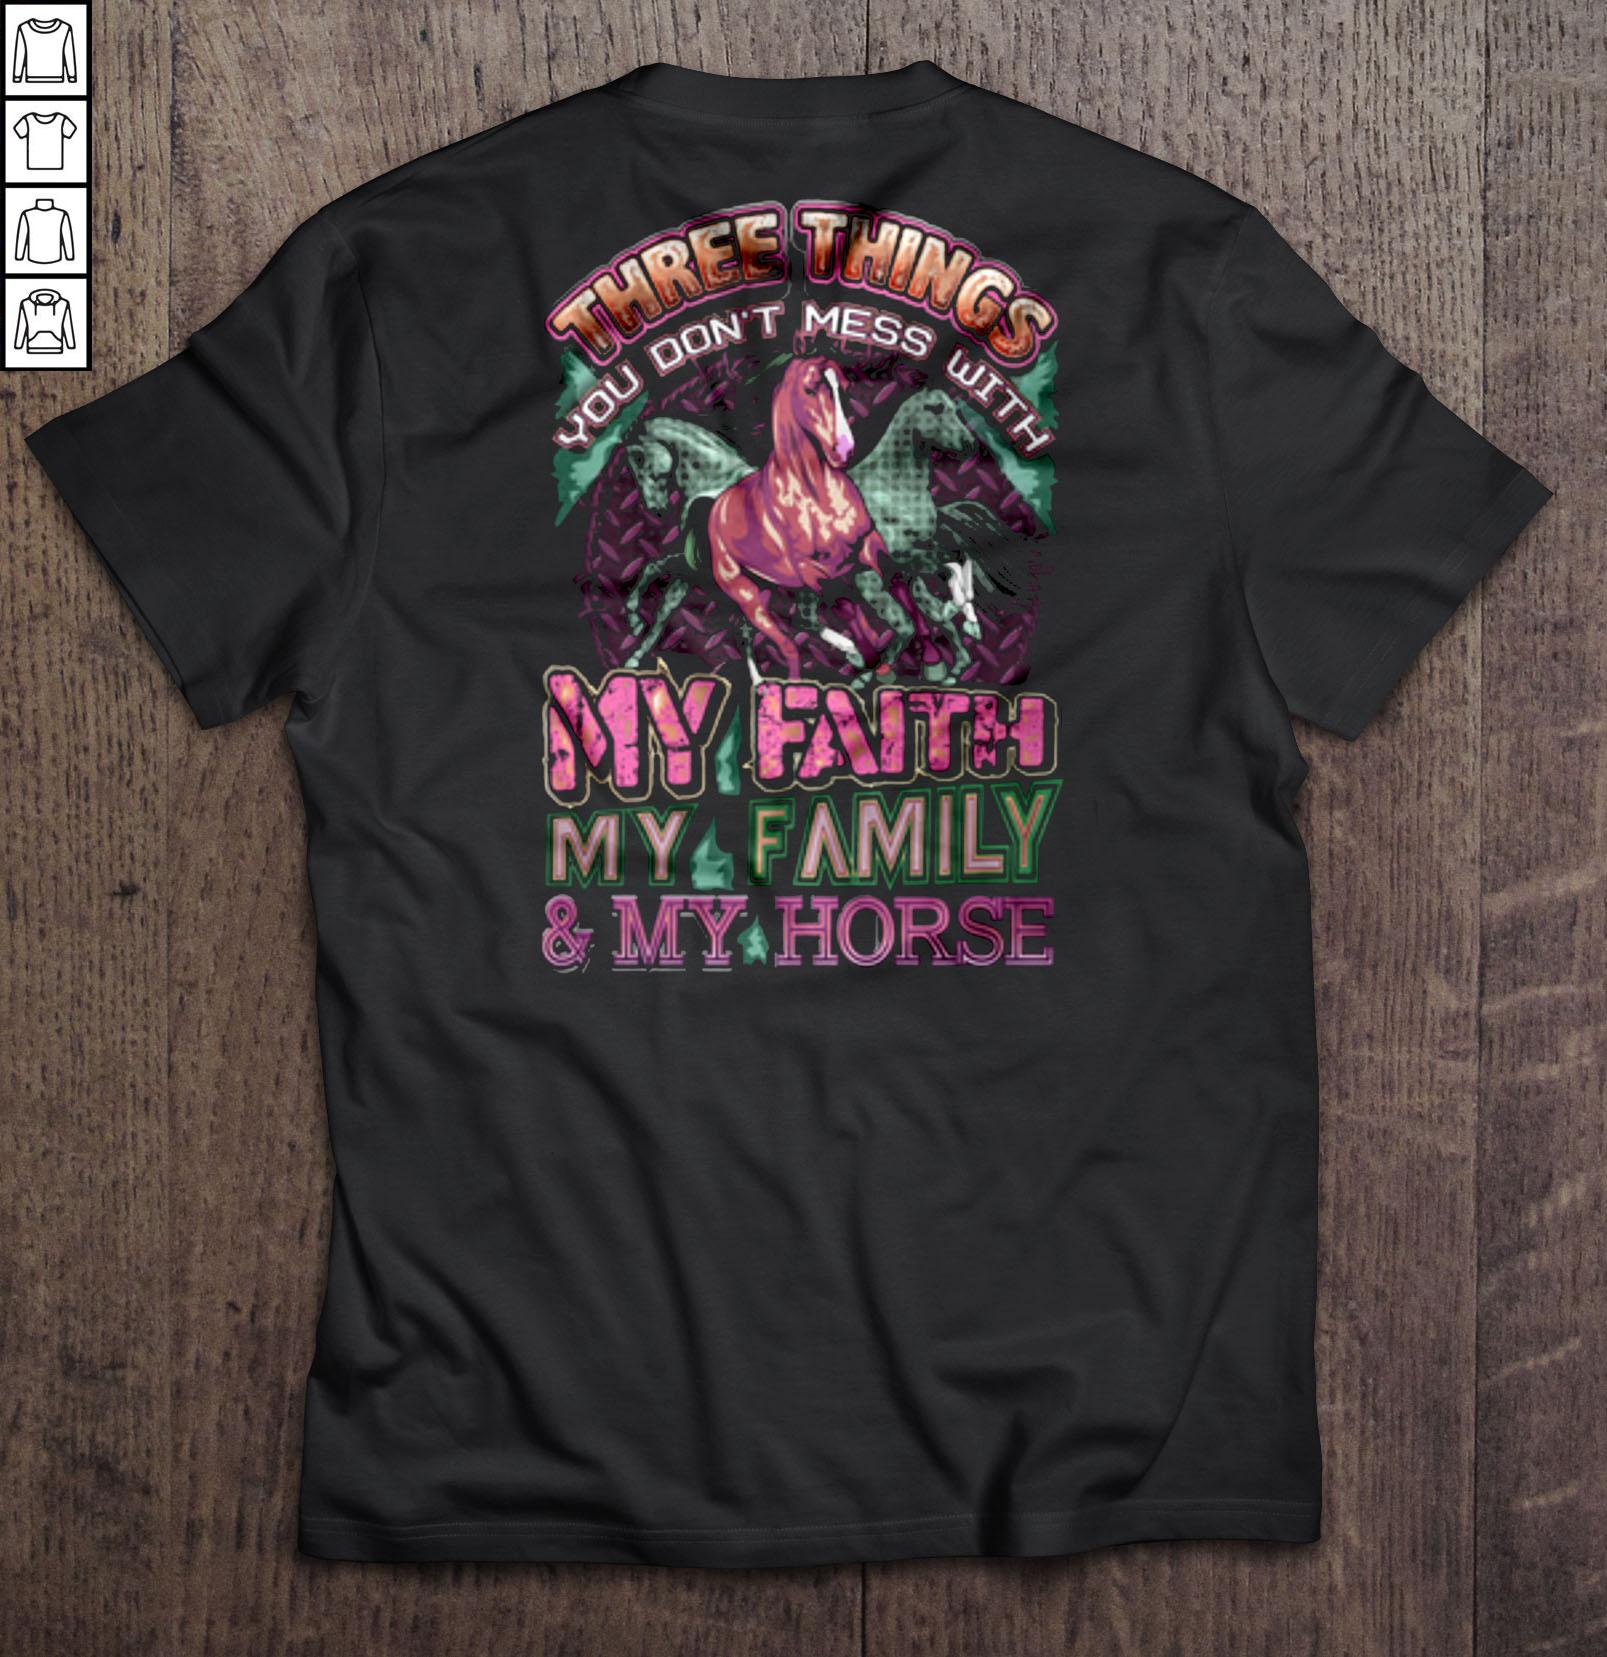 Three things you don’t mess with My faith My family & My horse Shirt